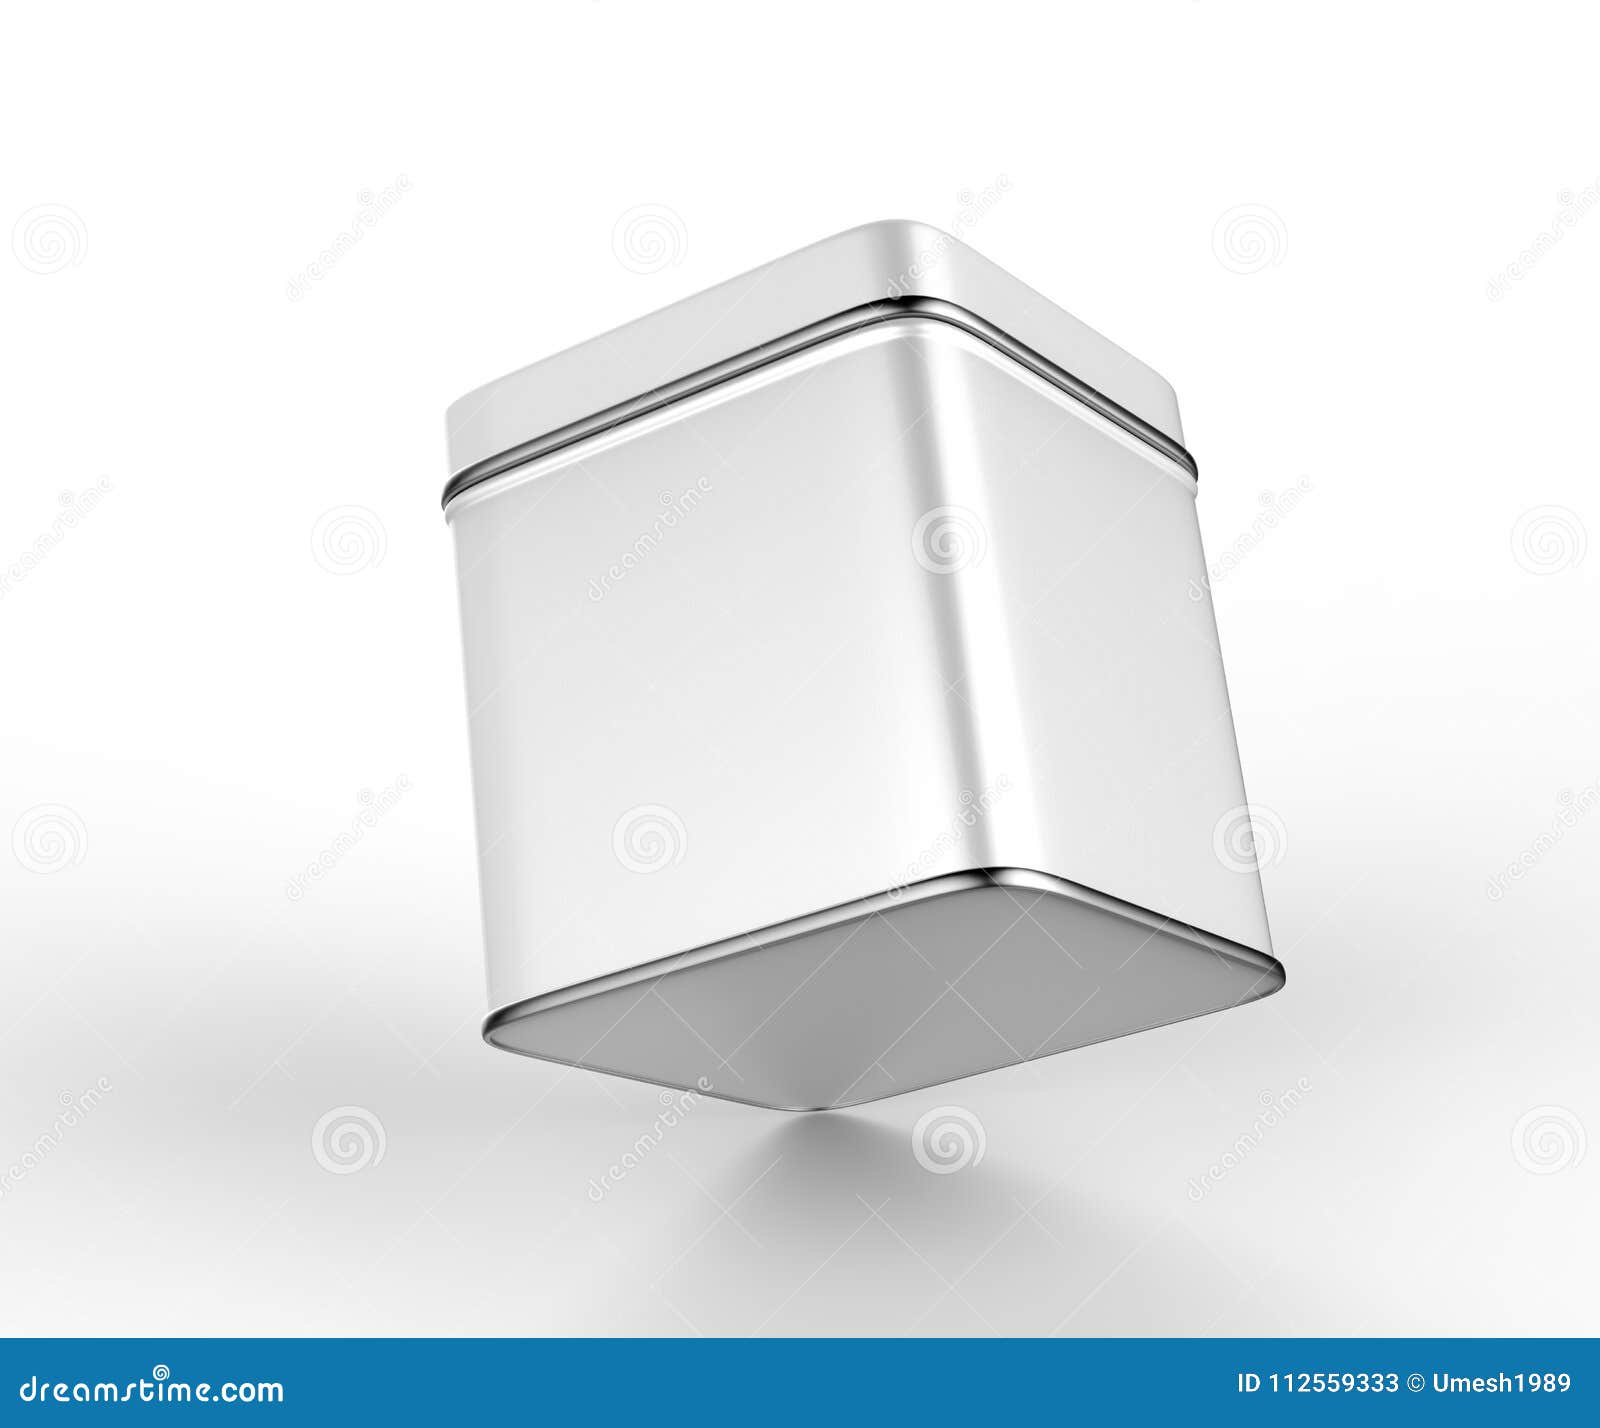 Stainless Steel Or Tin Metal Shiny Silver Box Container On White Background For Mock Up And ...